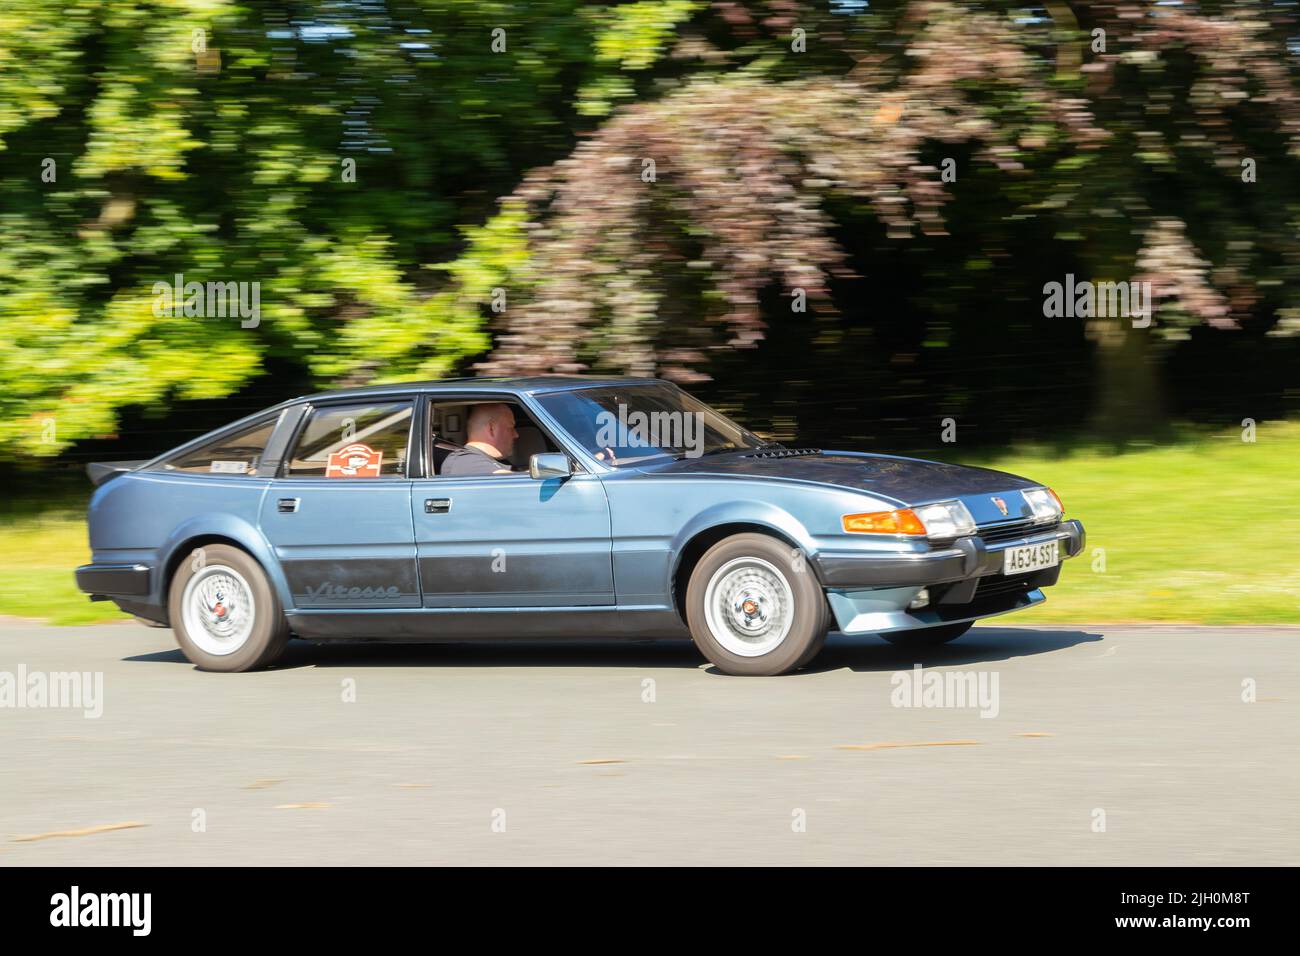 classic 1970s blue rover 3500 Sd1  car  driving on road Stock Photo